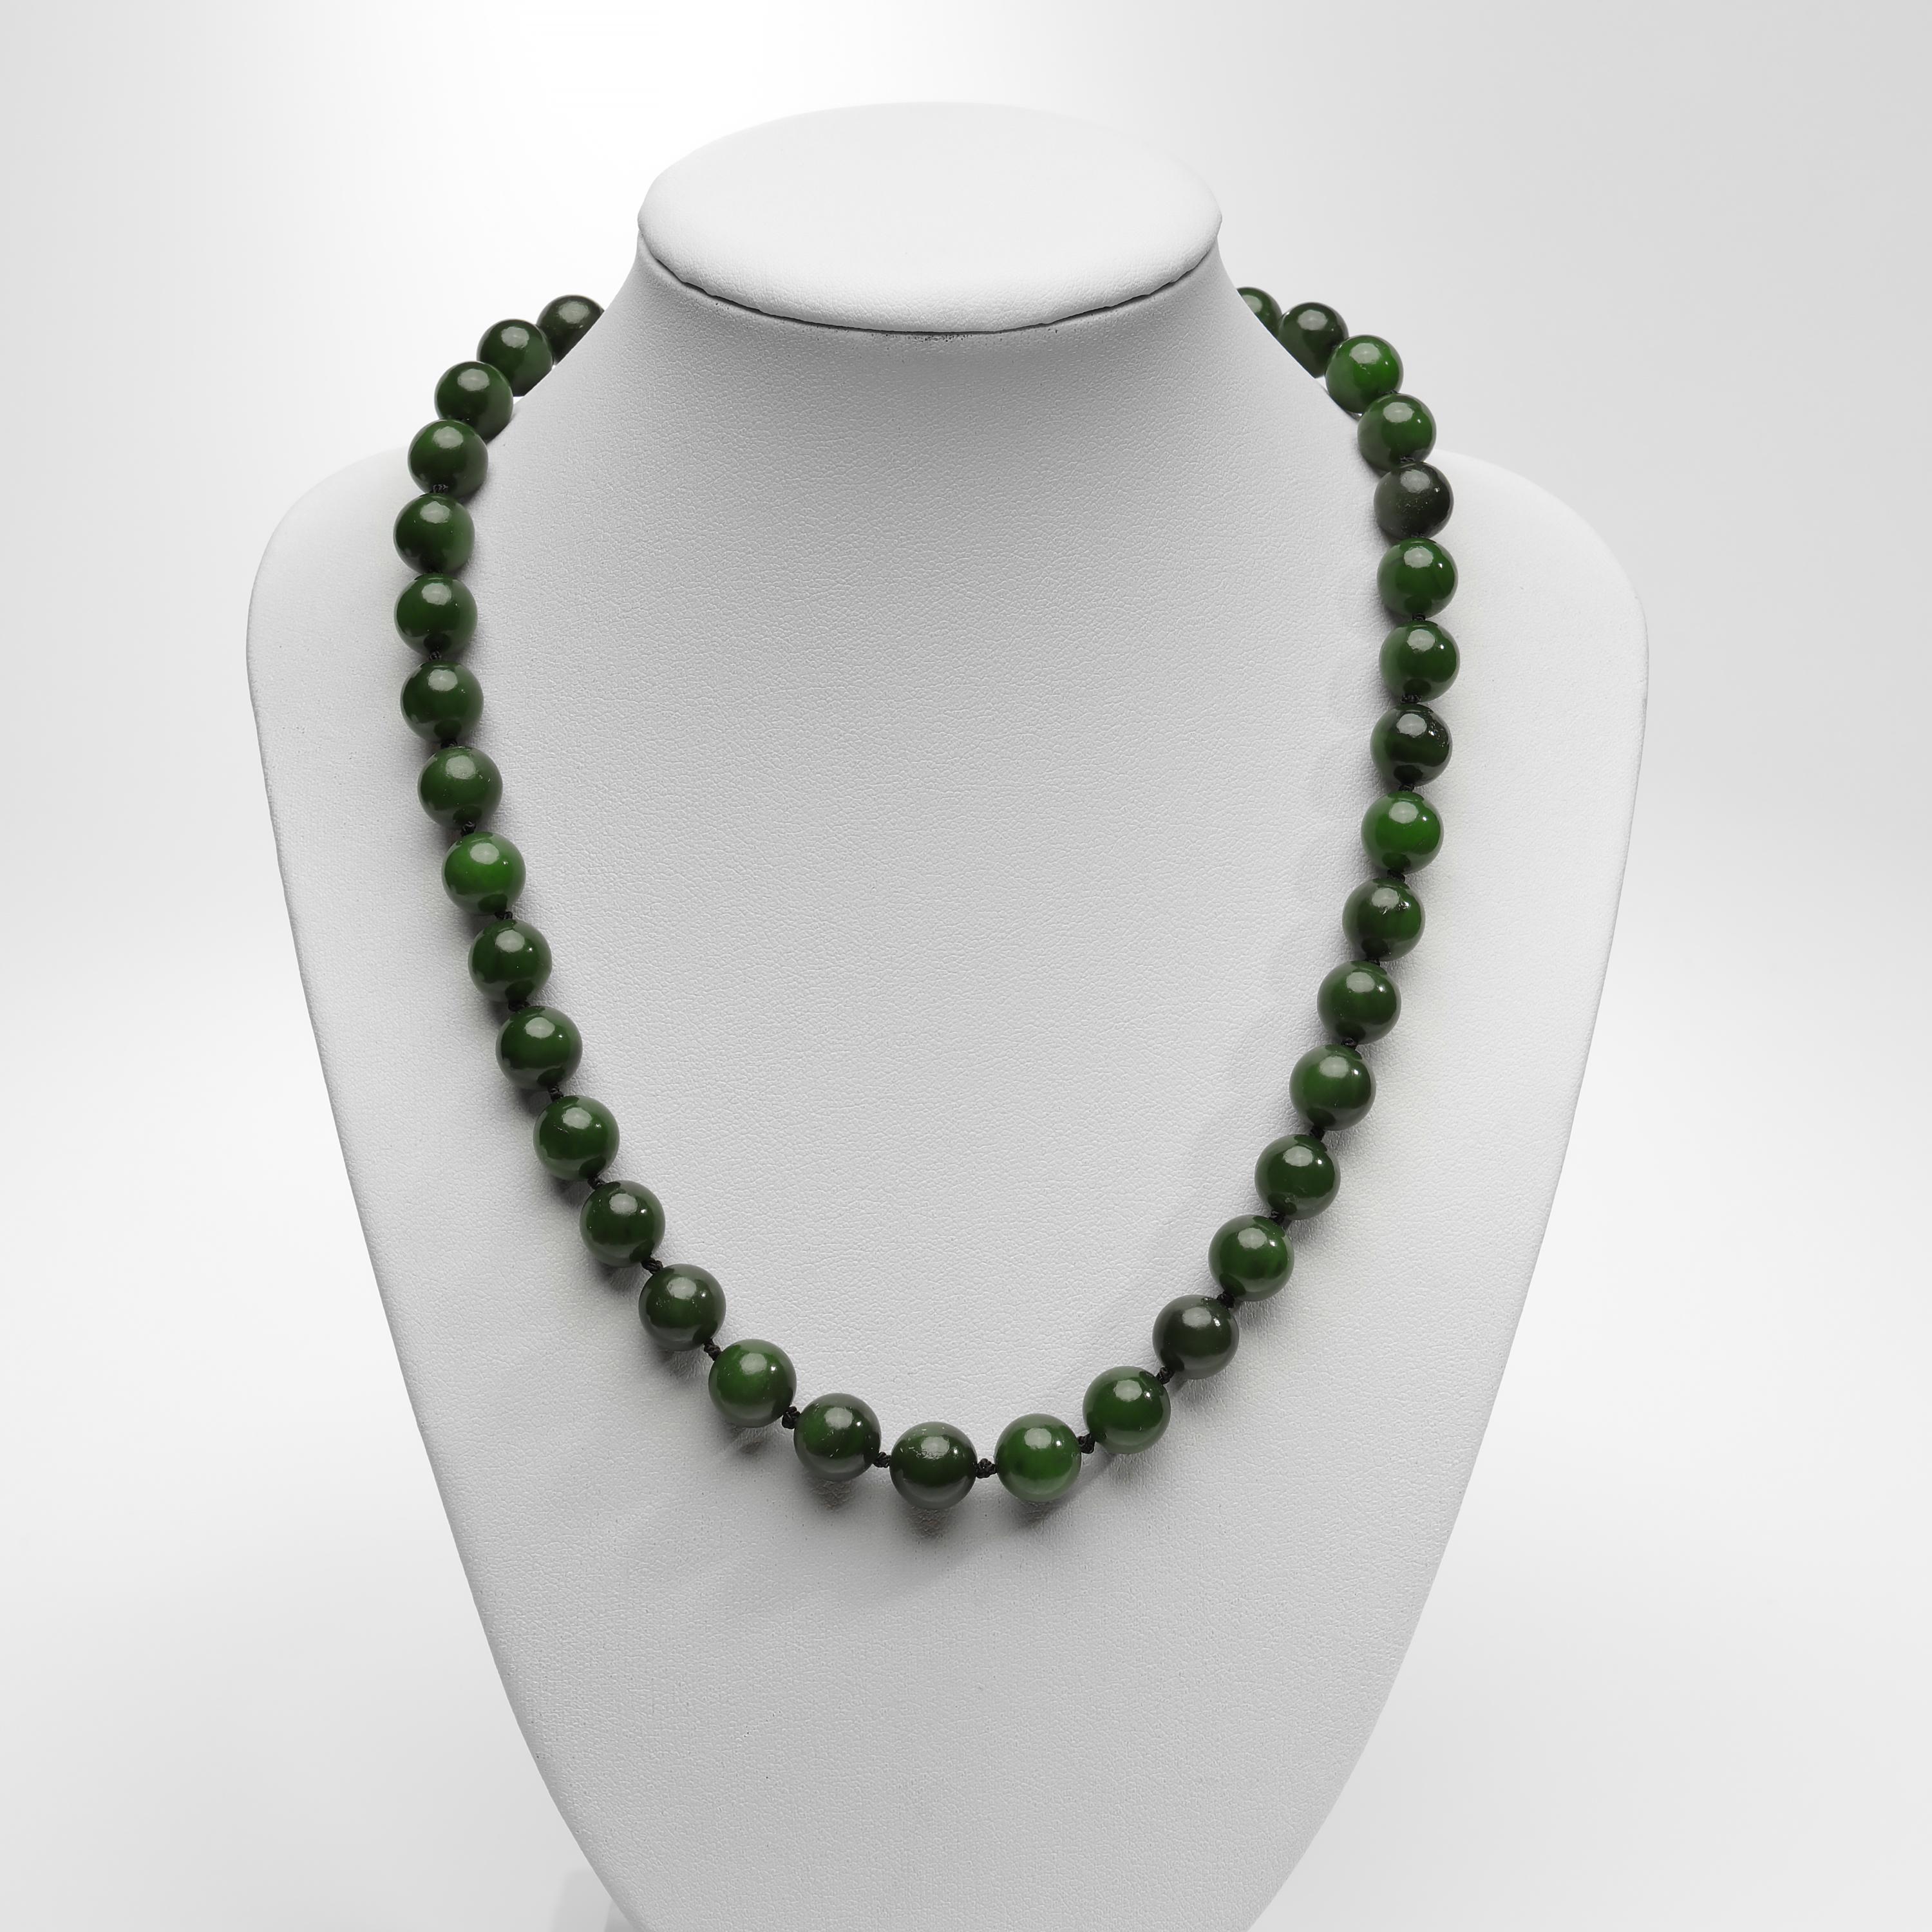 40 luminous and translucent deep forest green nephrite jade beads are simply —perfectly— presented in this stunning 18